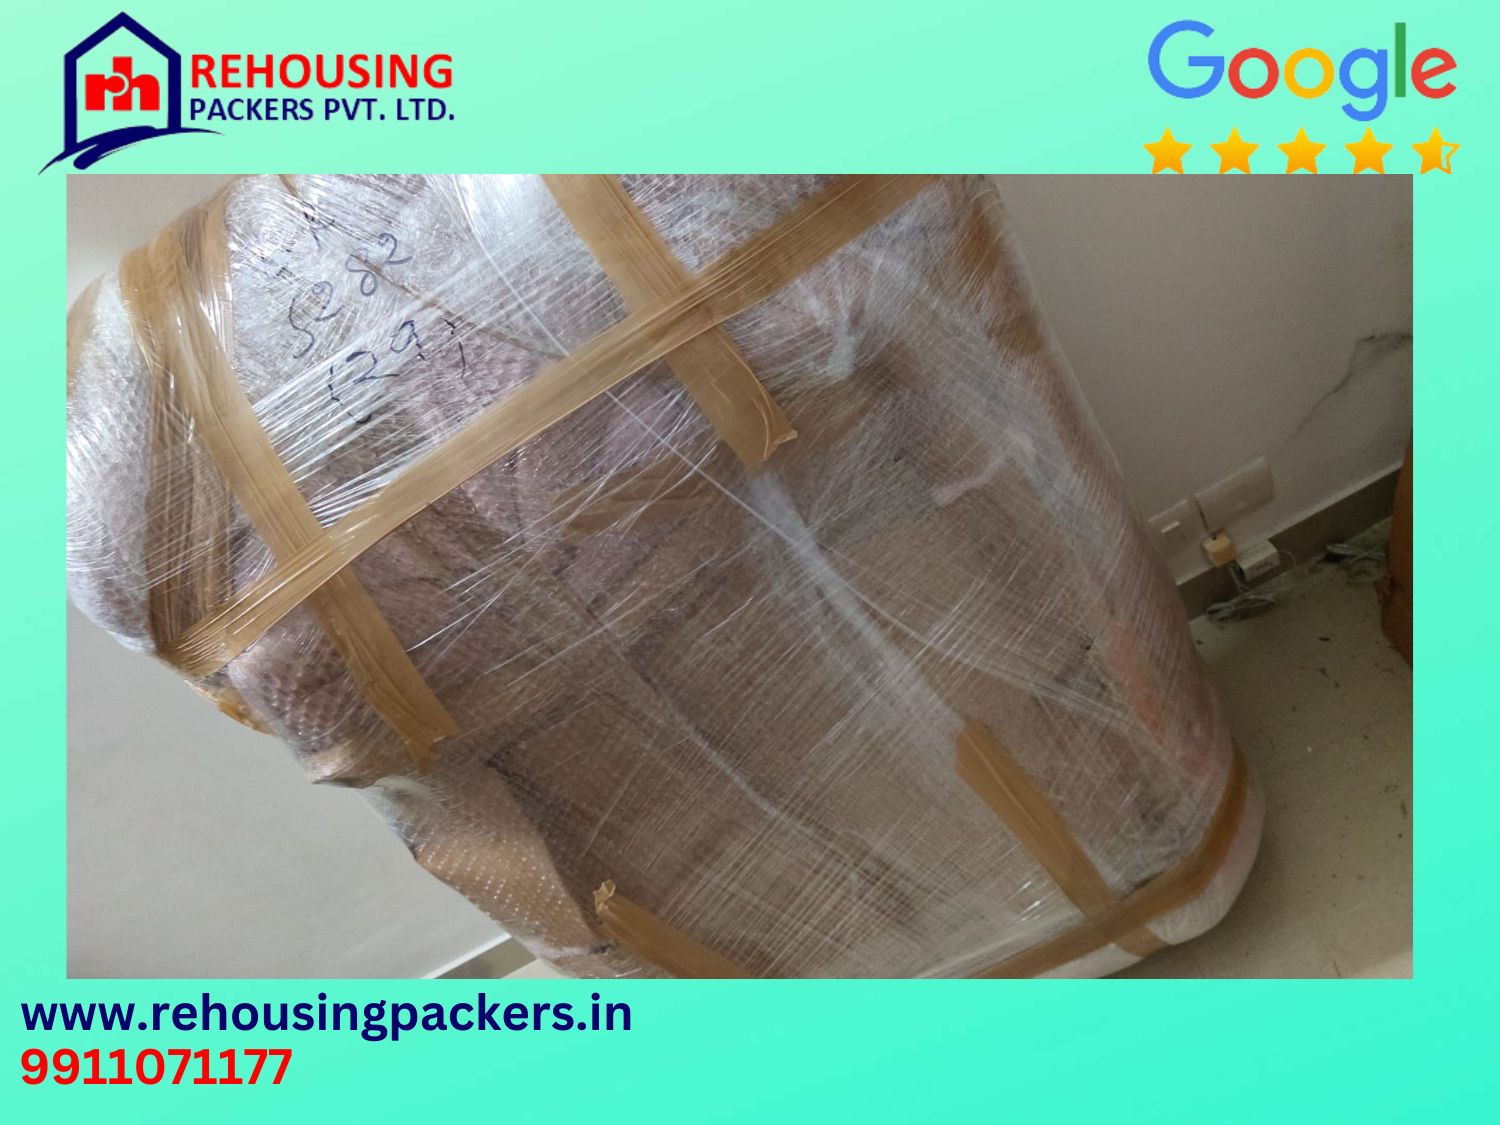 Packers and Movers from Noida to Kerala